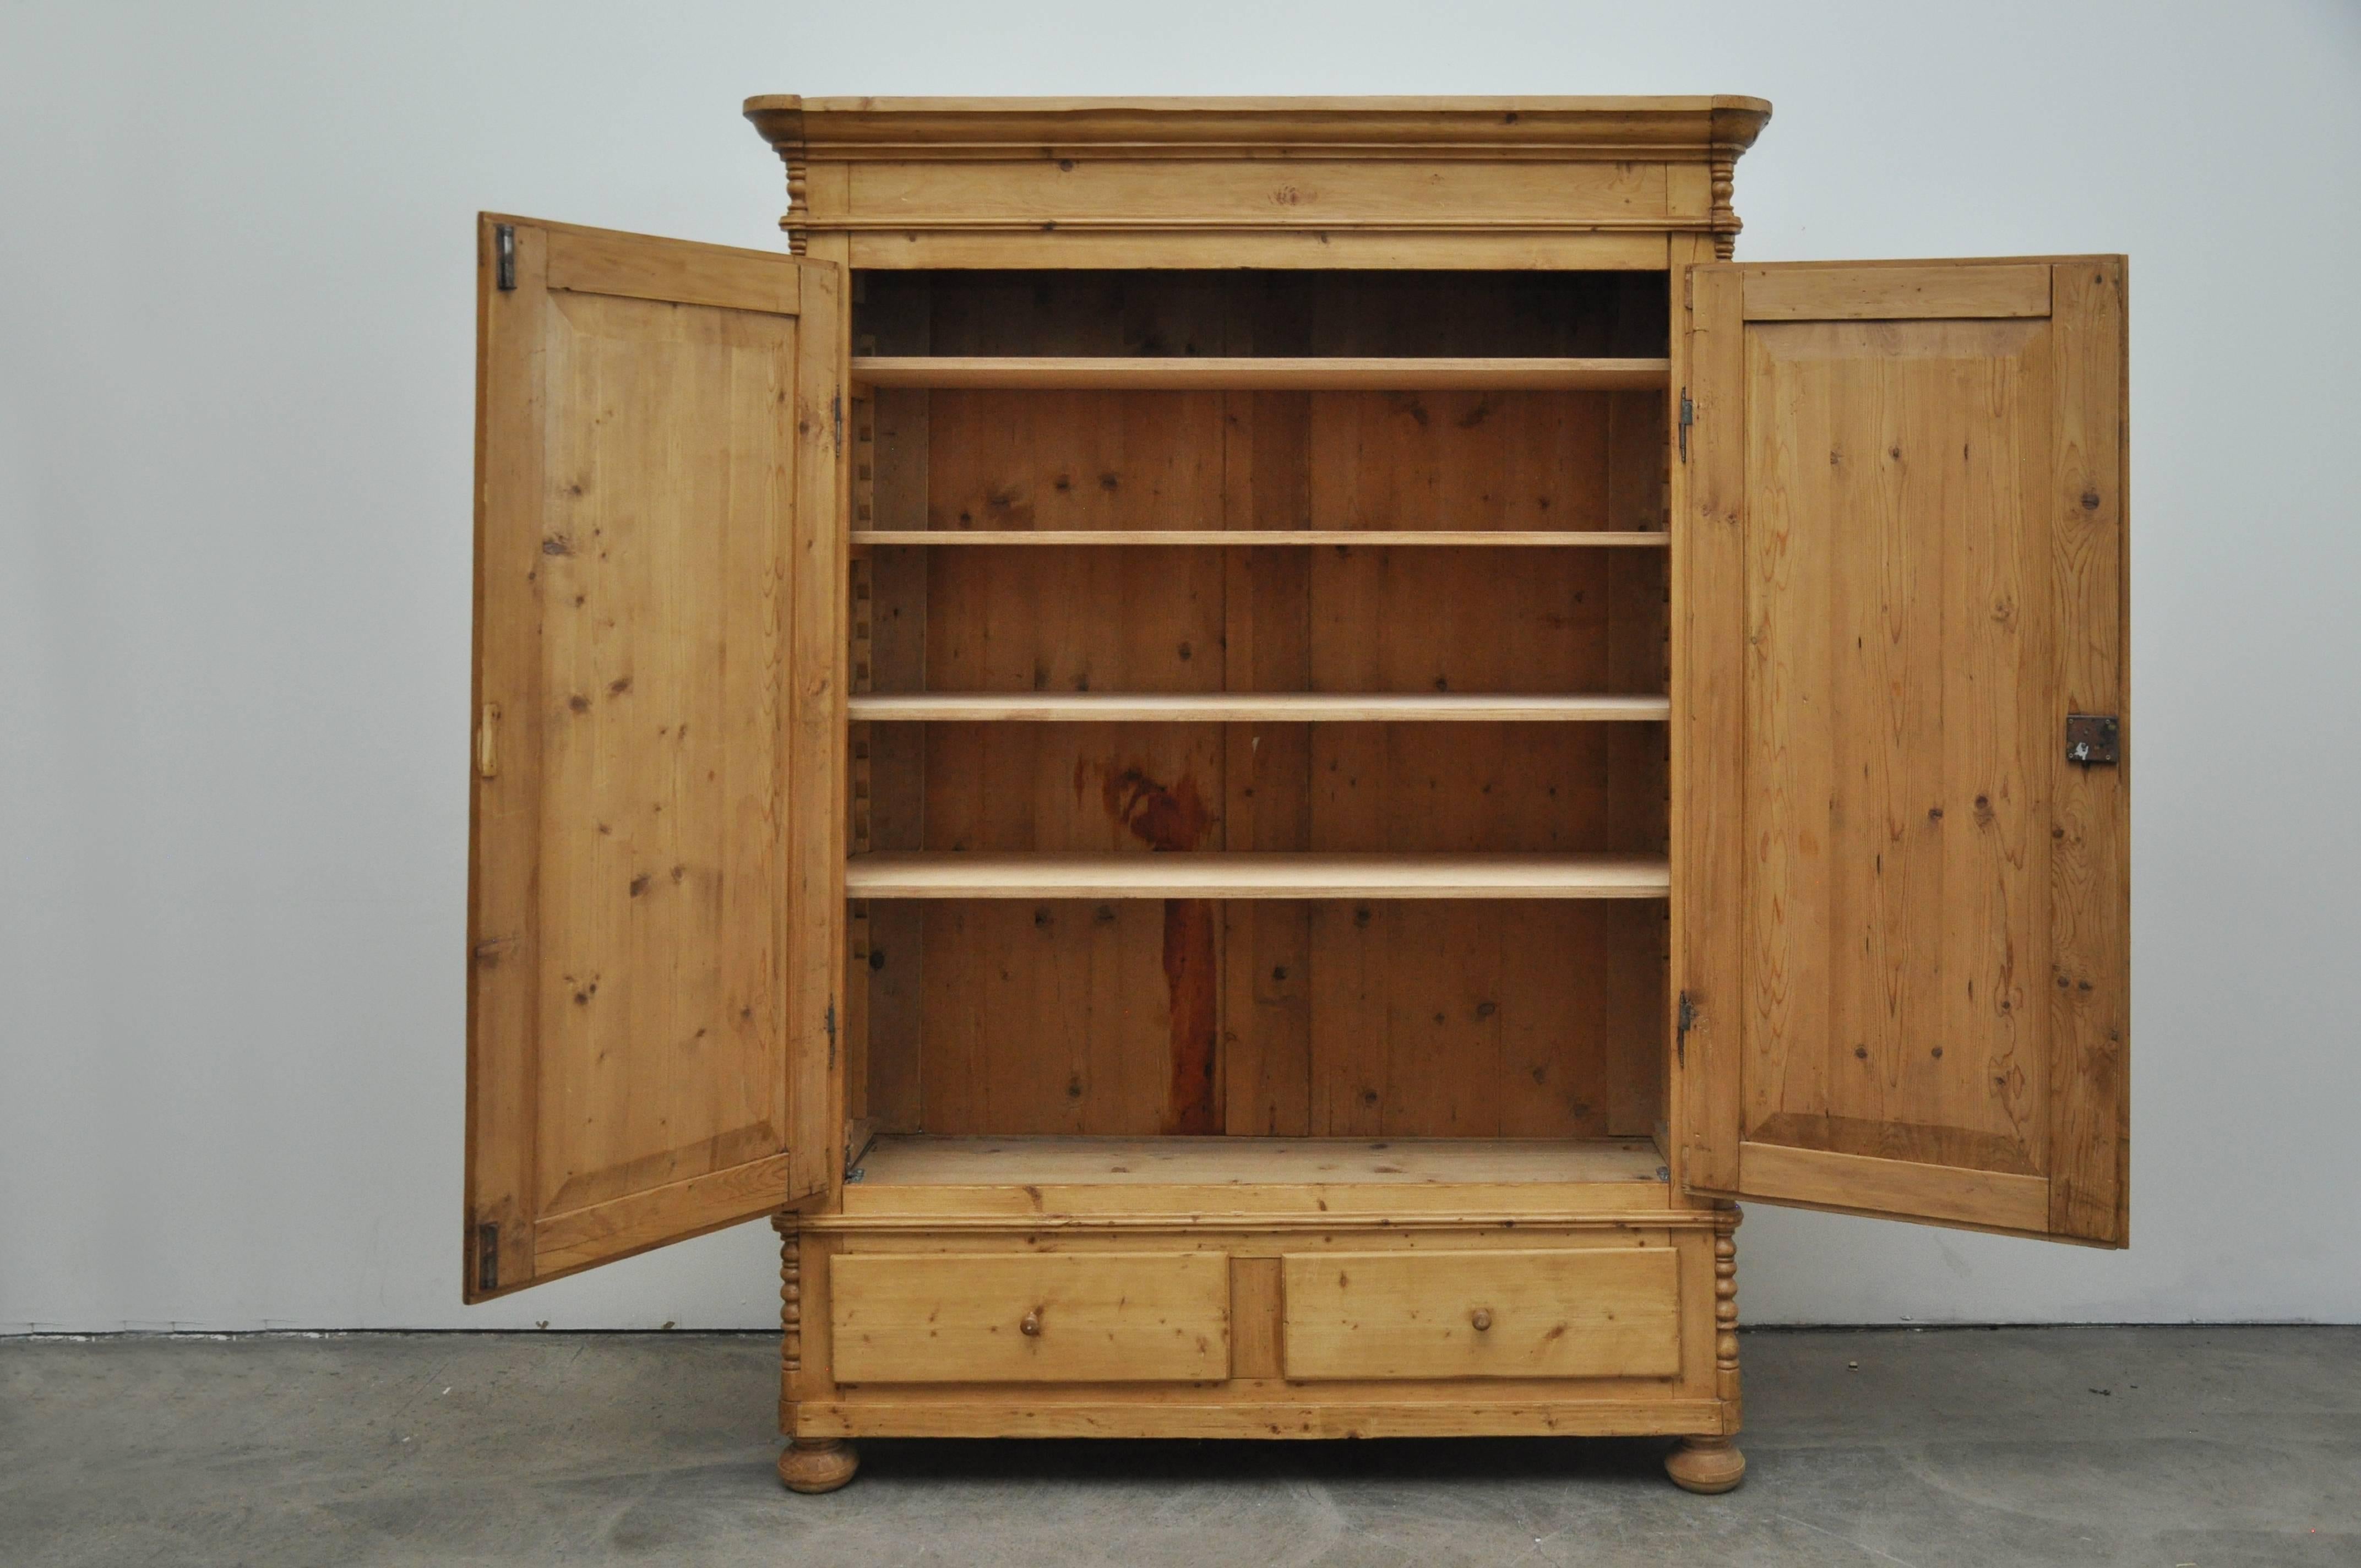 German pine cupboard, circa 1865. Cupboard has two doors and two drawers. Interior has five shelves. Bun feet and curved moldings.